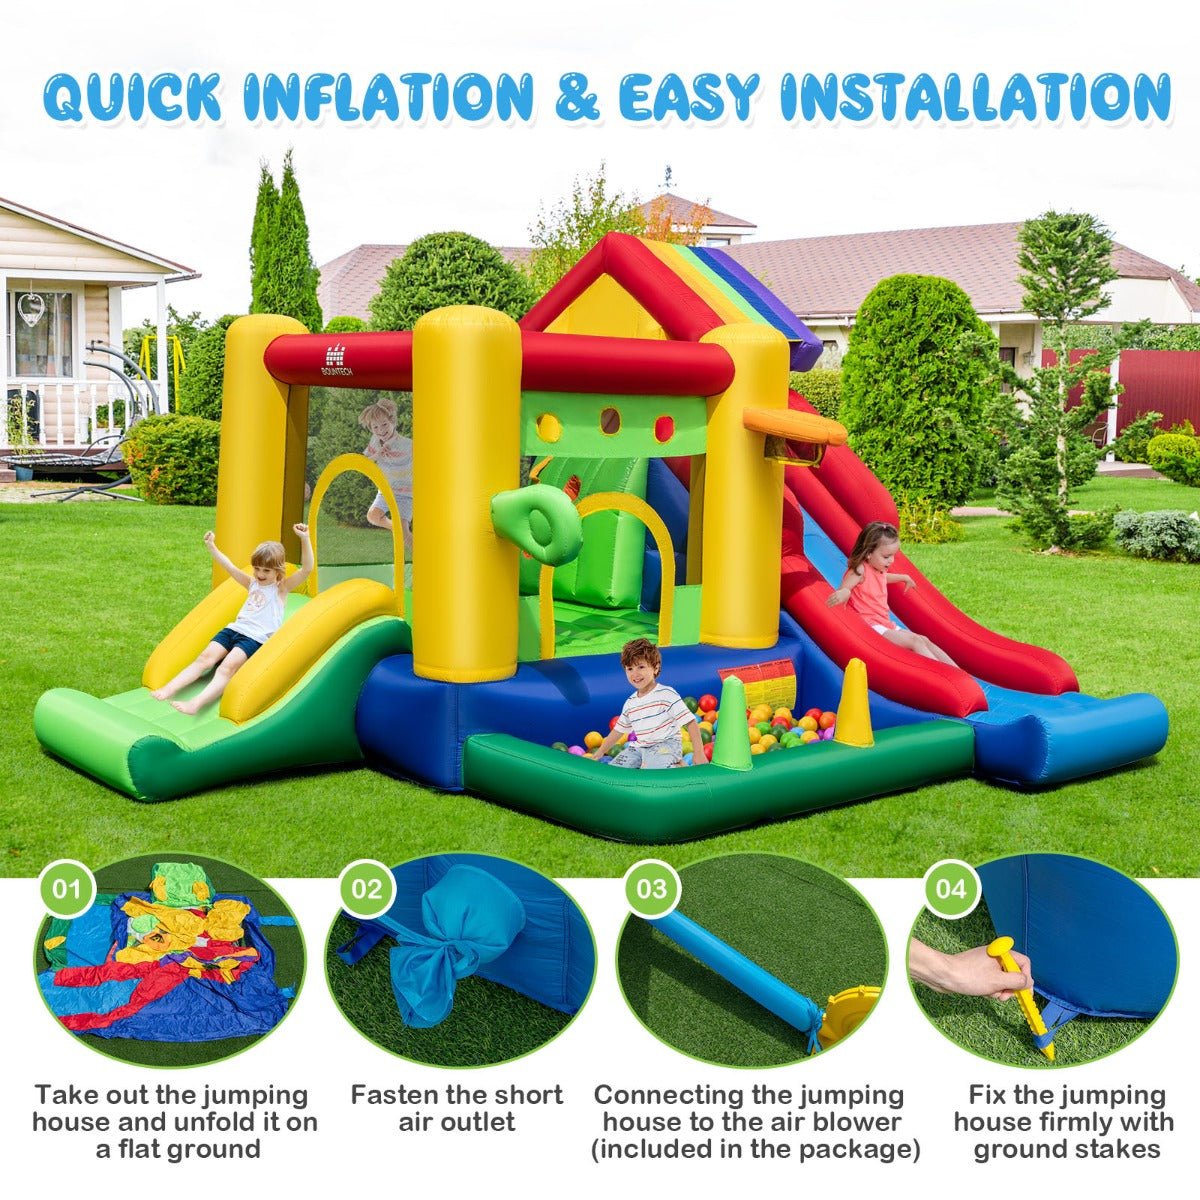 Enjoy Hours of Fun with the 7-In-1 Inflatable Rainbow Castle - Buy Now!